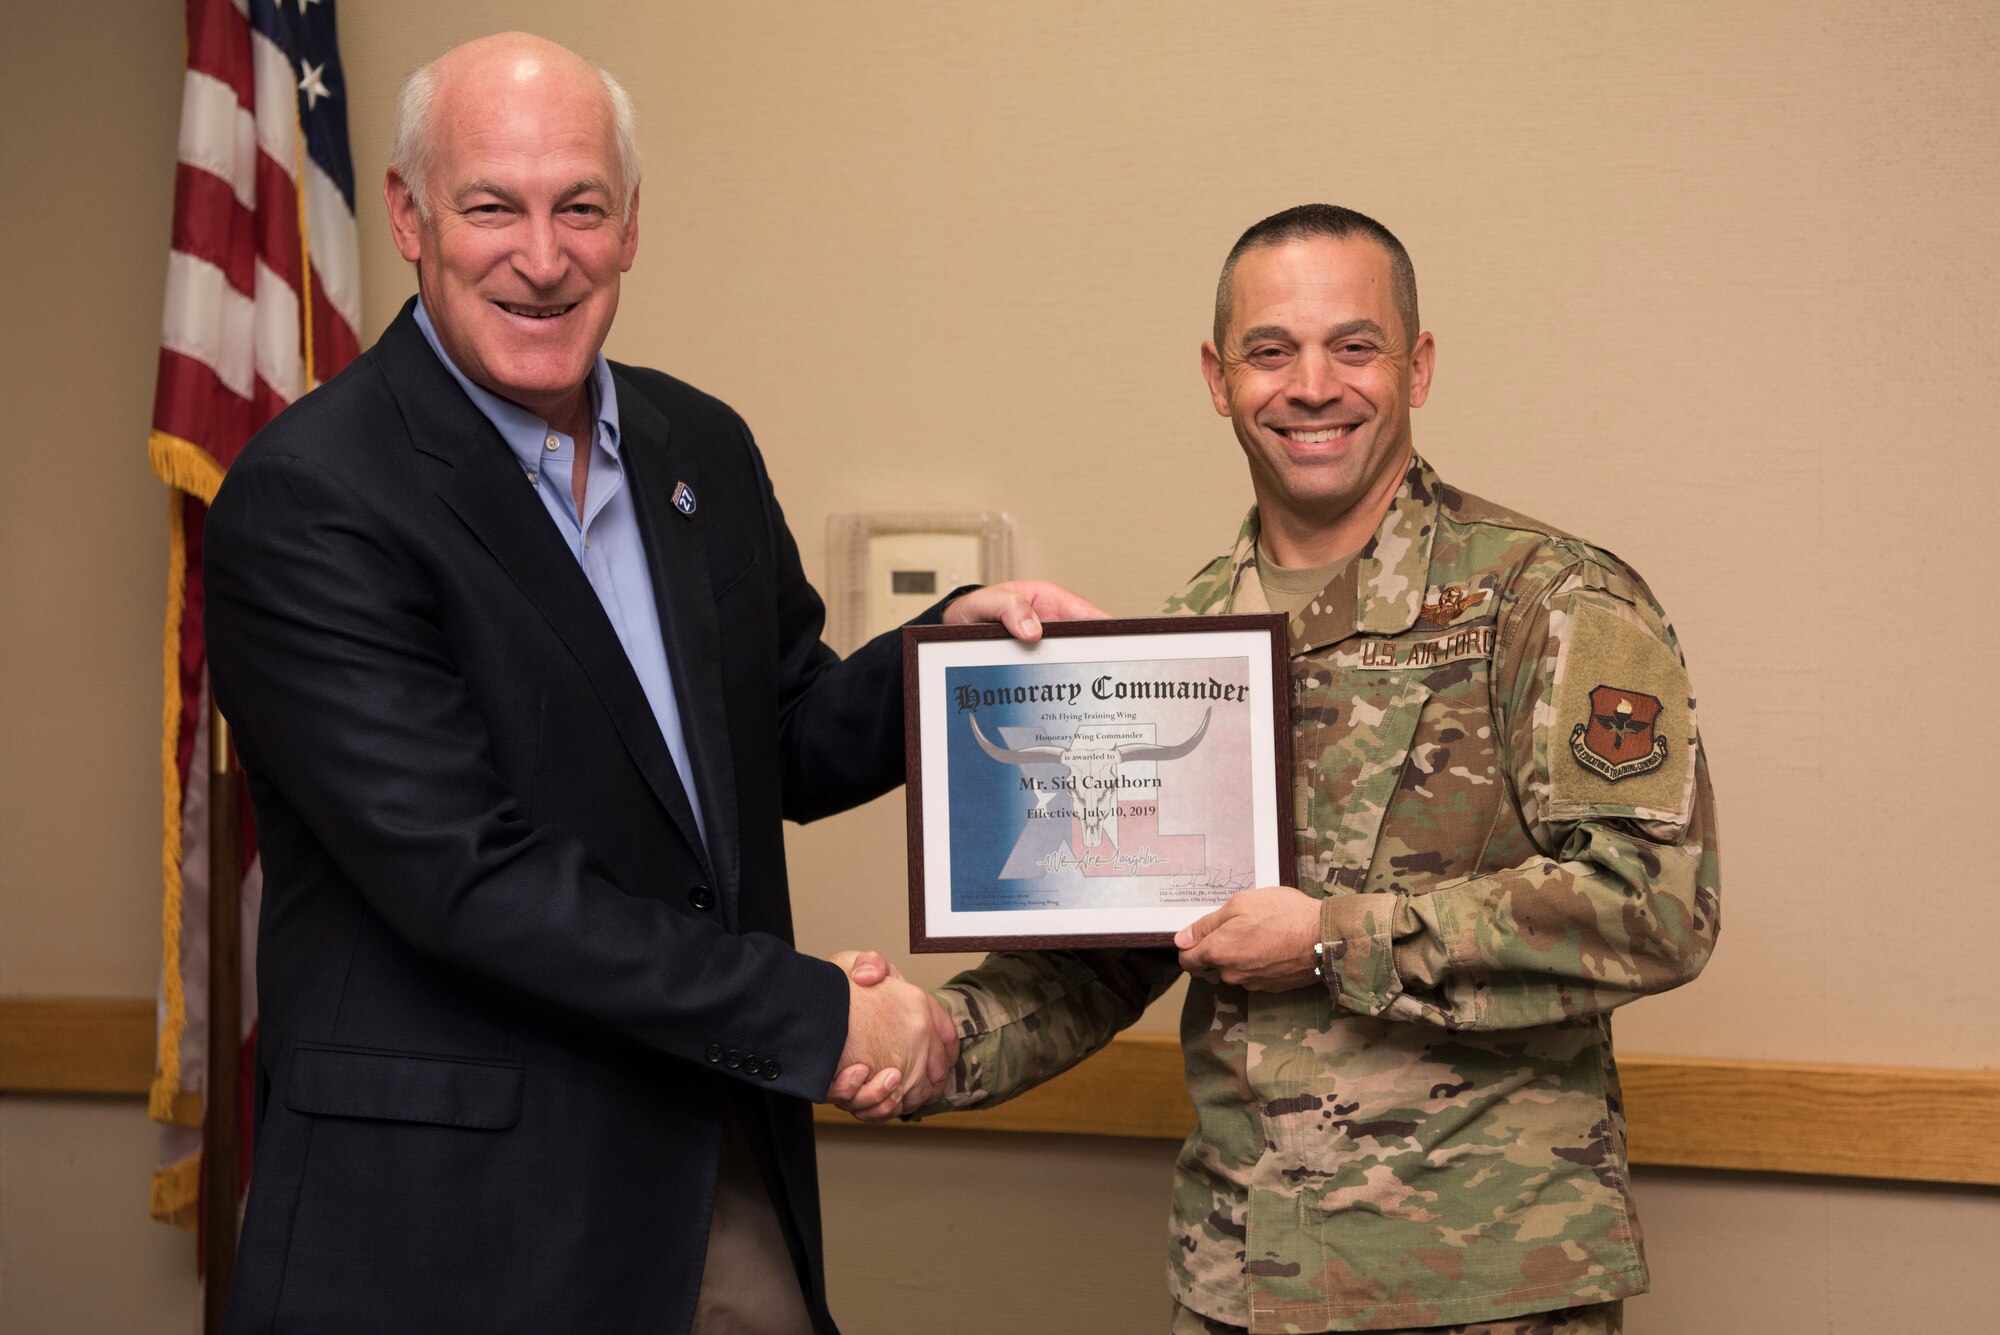 Sid Cauthorn, 47th Flying Training Wing honorary wing commander, receives an award from Col. Lee Gentile, 47th FTW commander, in Del Rio, Texas, Oct. 15, 2019. The honorary wing commander program enables the base and local community to develop and encourage the sharing of ideas, experiences and friendships. (U.S. Air Force photo by Senior Airman Marco A. Gomez)